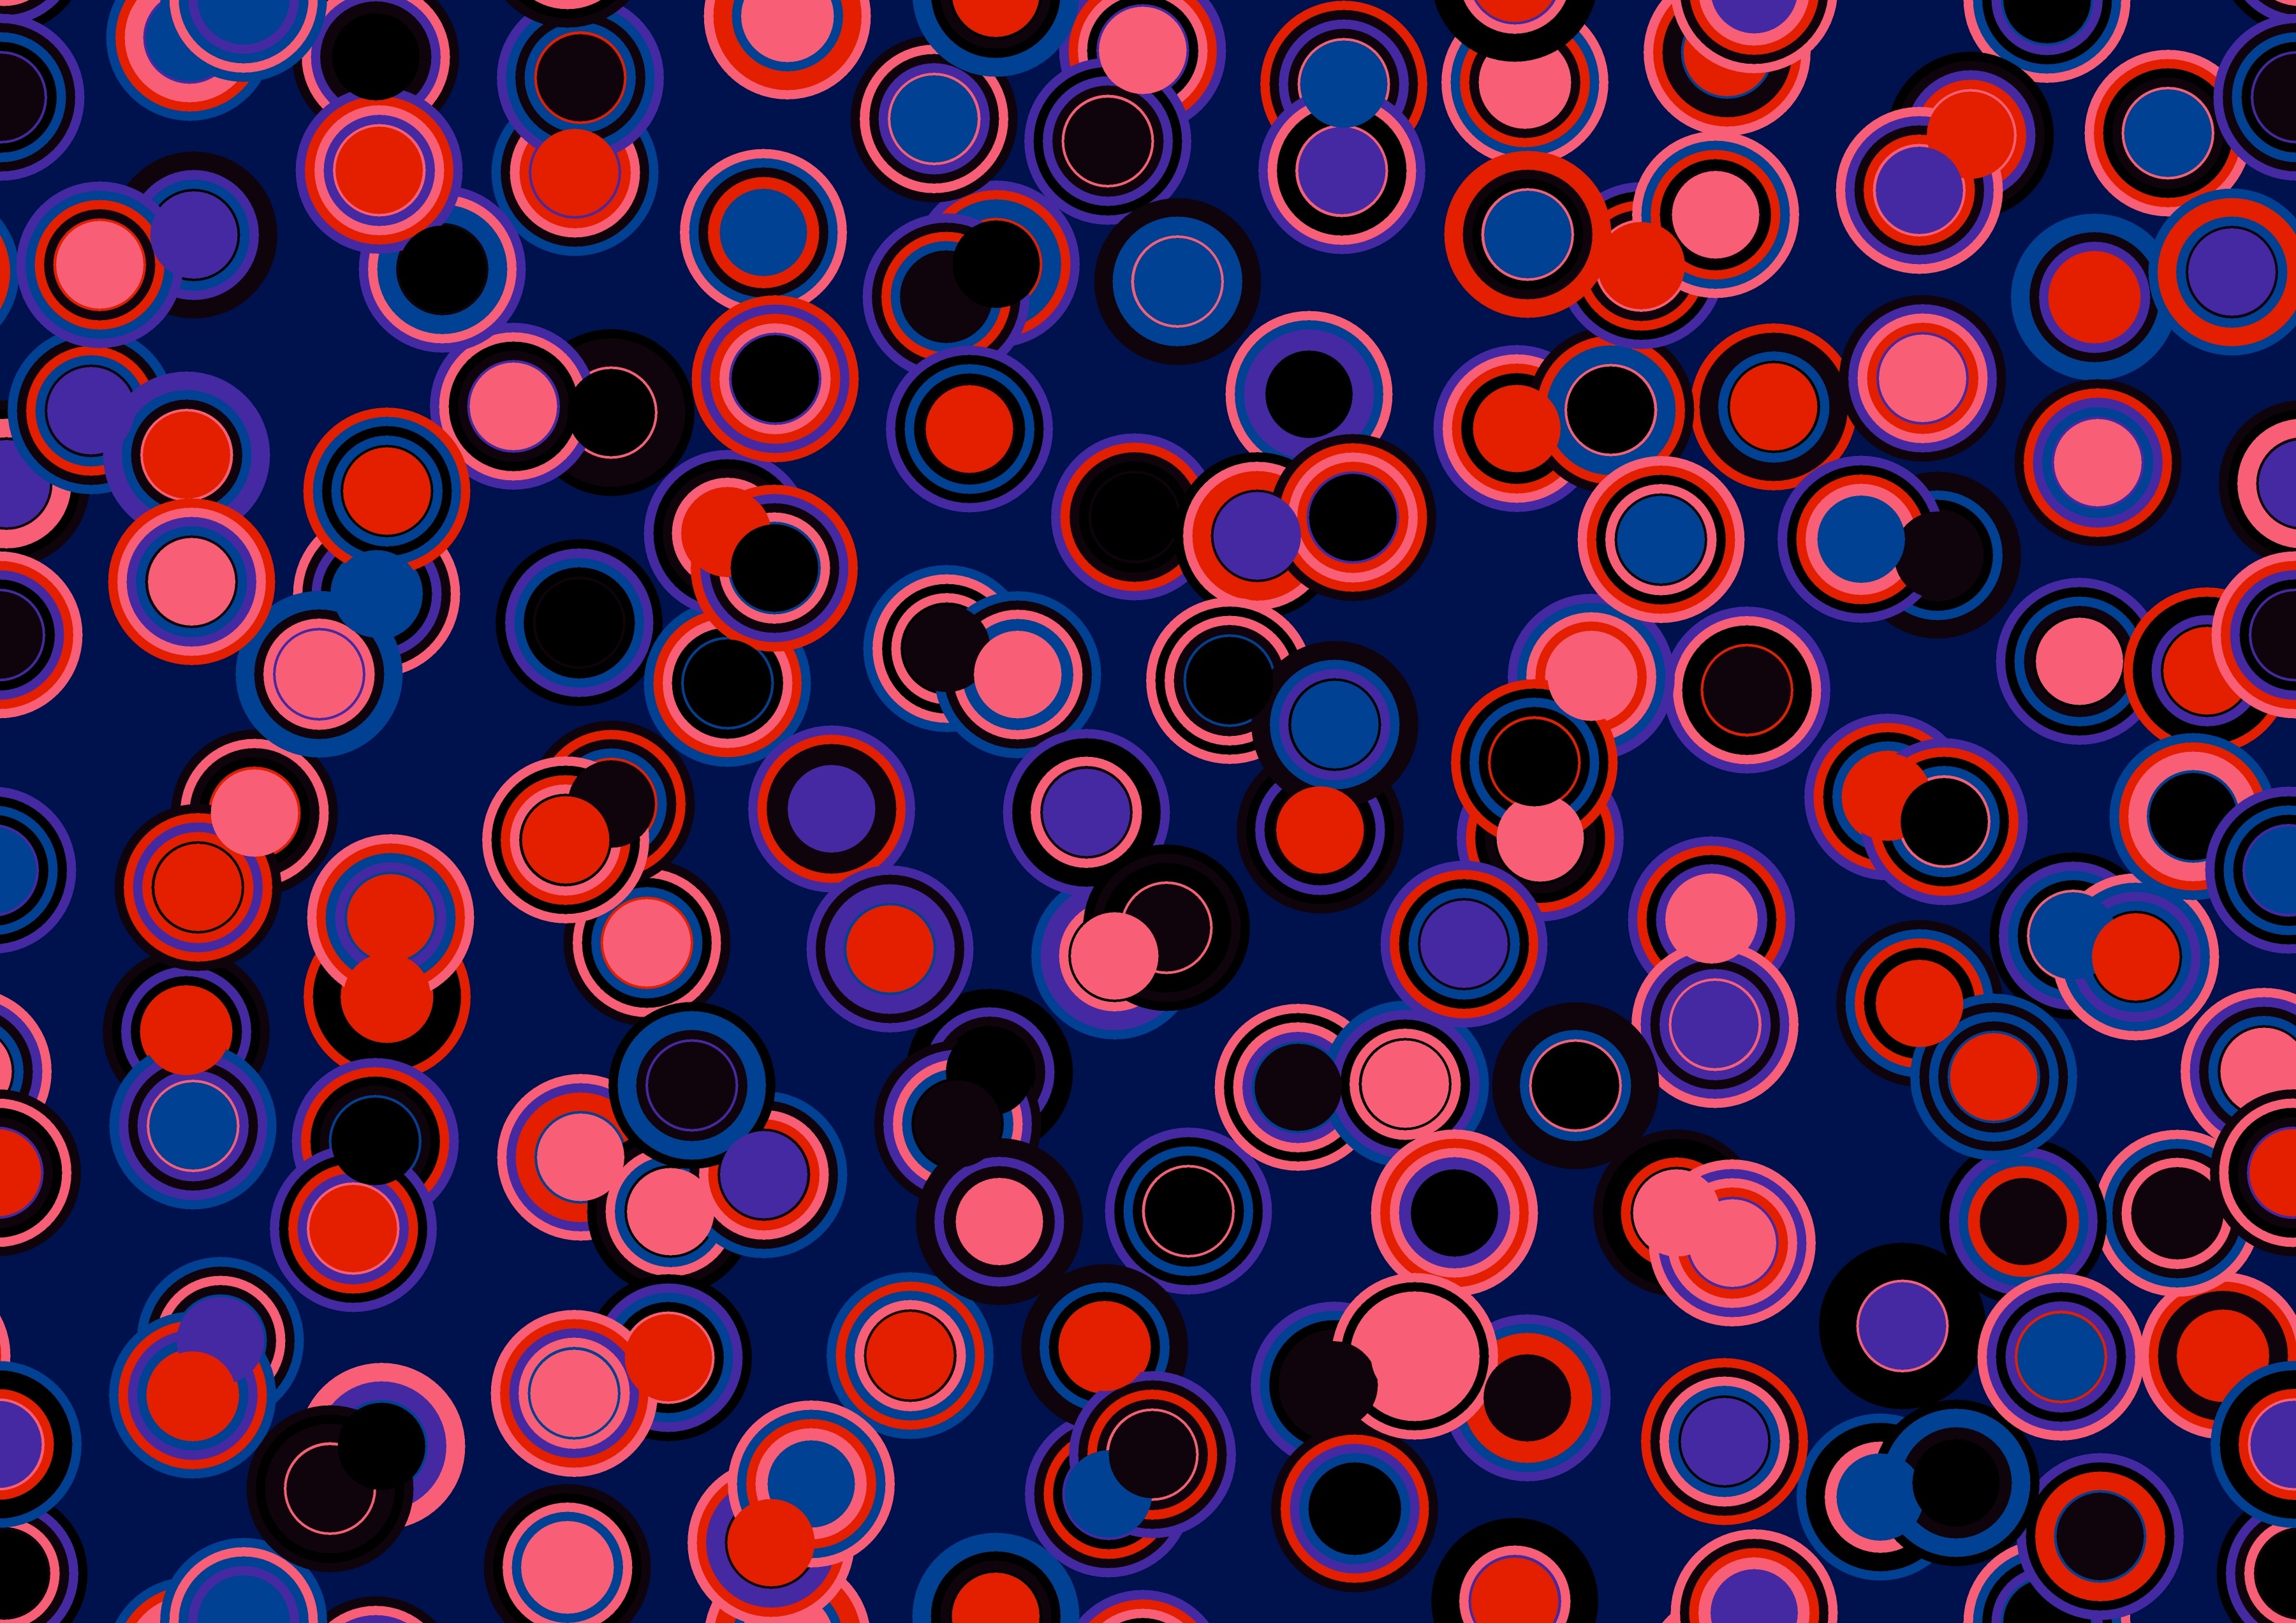 multicolored, motley, form, circles, texture, textures, forms High Definition image